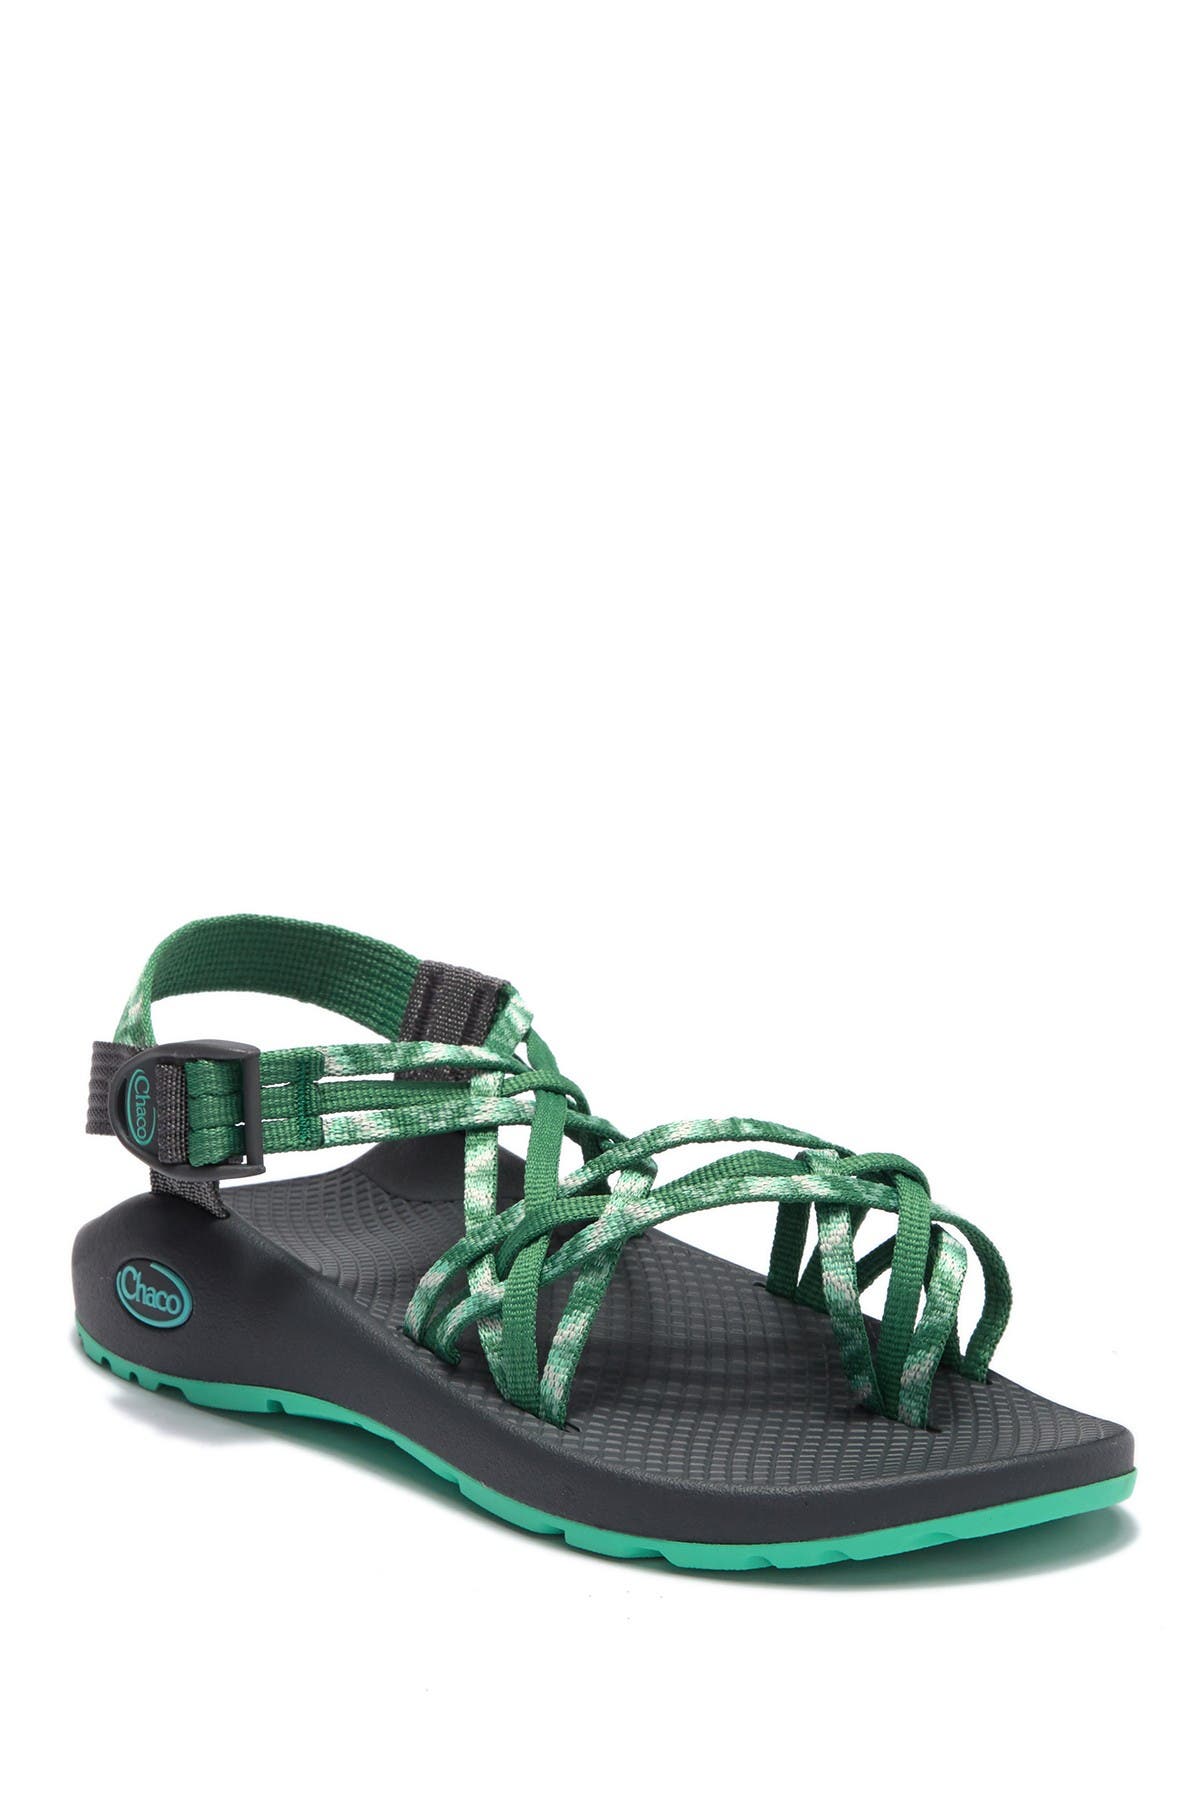 chaco zx3 classic sandal